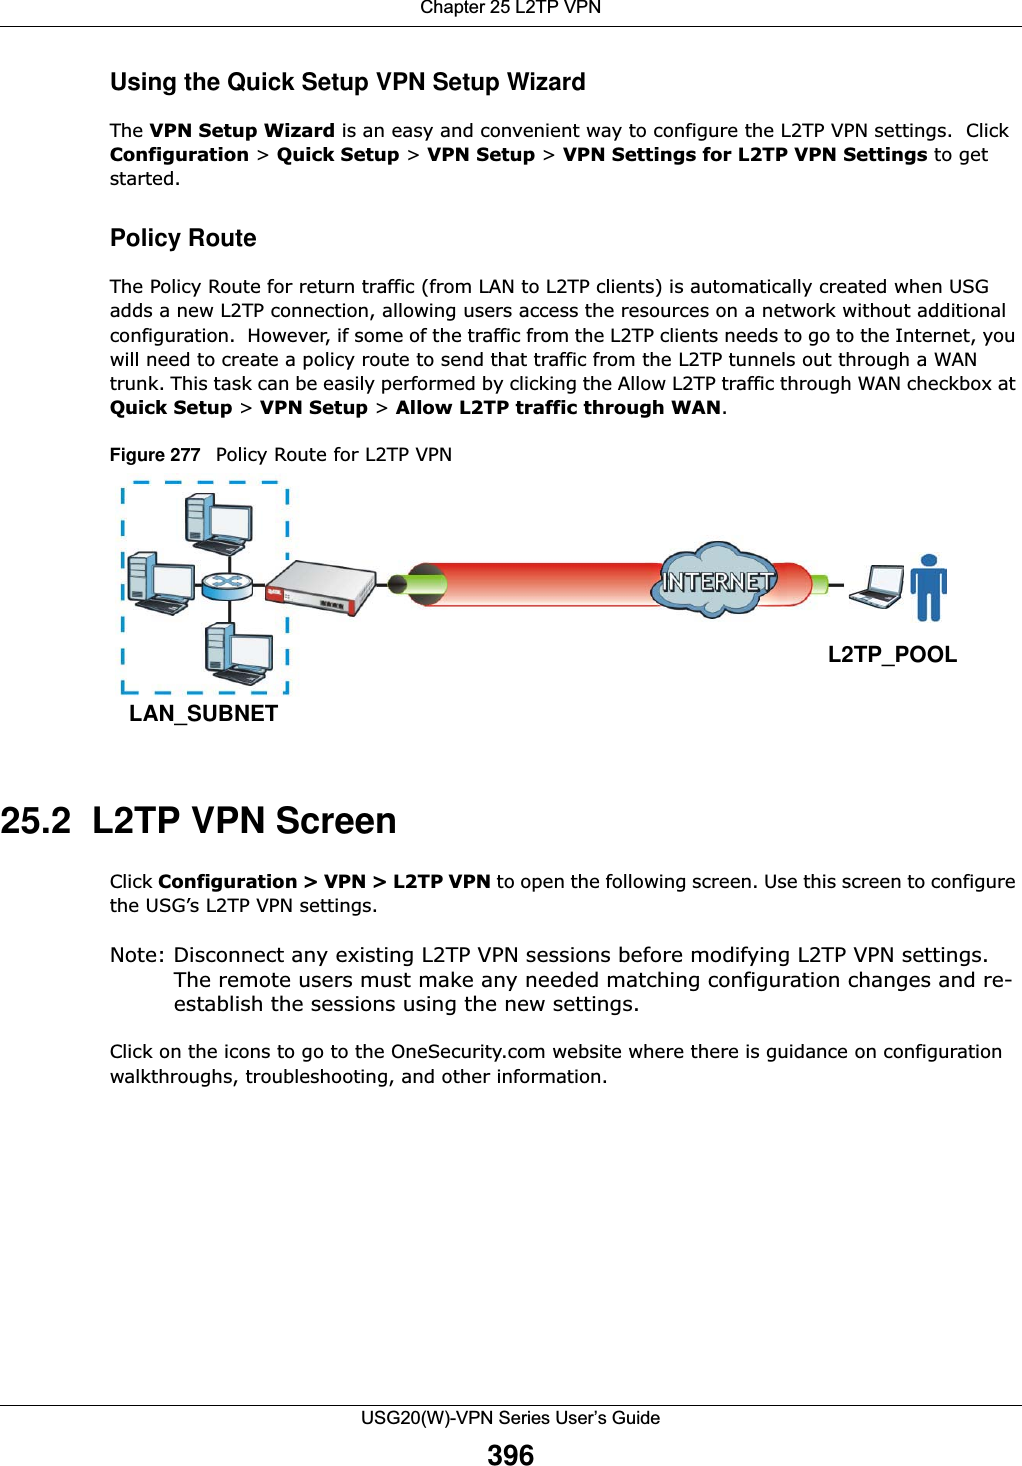 Chapter 25 L2TP VPNUSG20(W)-VPN Series User’s Guide396Using the Quick Setup VPN Setup WizardThe VPN Setup Wizard is an easy and convenient way to configure the L2TP VPN settings.  Click Configuration &gt; Quick Setup &gt; VPN Setup &gt; VPN Settings for L2TP VPN Settings to get started.Policy RouteThe Policy Route for return traffic (from LAN to L2TP clients) is automatically created when USG adds a new L2TP connection, allowing users access the resources on a network without additional configuration.  However, if some of the traffic from the L2TP clients needs to go to the Internet, you will need to create a policy route to send that traffic from the L2TP tunnels out through a WAN trunk. This task can be easily performed by clicking the Allow L2TP traffic through WAN checkbox at Quick Setup &gt; VPN Setup &gt; Allow L2TP traffic through WAN.Figure 277   Policy Route for L2TP VPN 25.2  L2TP VPN ScreenClick Configuration &gt; VPN &gt; L2TP VPN to open the following screen. Use this screen to configure the USG’s L2TP VPN settings. Note: Disconnect any existing L2TP VPN sessions before modifying L2TP VPN settings. The remote users must make any needed matching configuration changes and re-establish the sessions using the new settings.Click on the icons to go to the OneSecurity.com website where there is guidance on configuration walkthroughs, troubleshooting, and other information.LAN_SUBNETL2TP_POOL